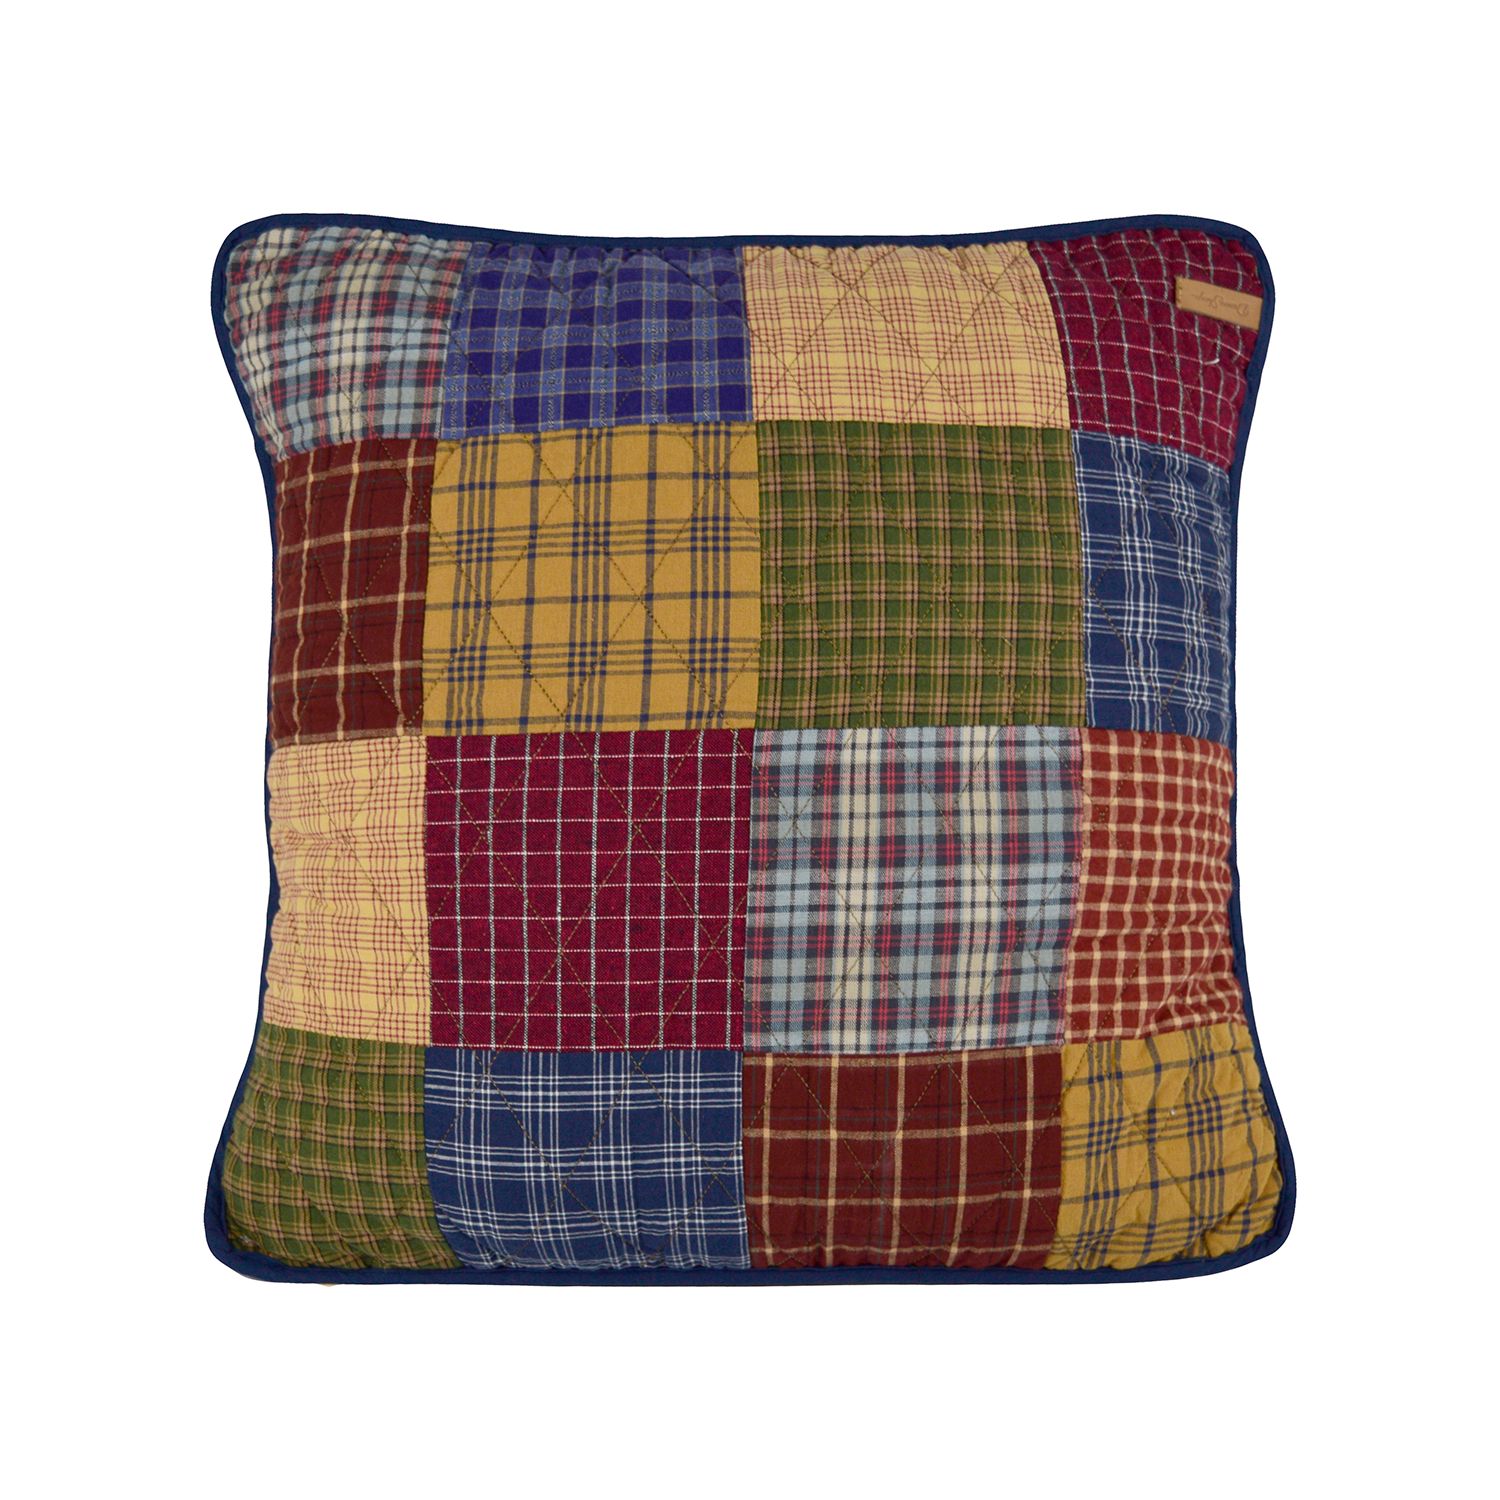 Image for Donna Sharp Lakehouse Decorative Throw Pillow at Kohl's.